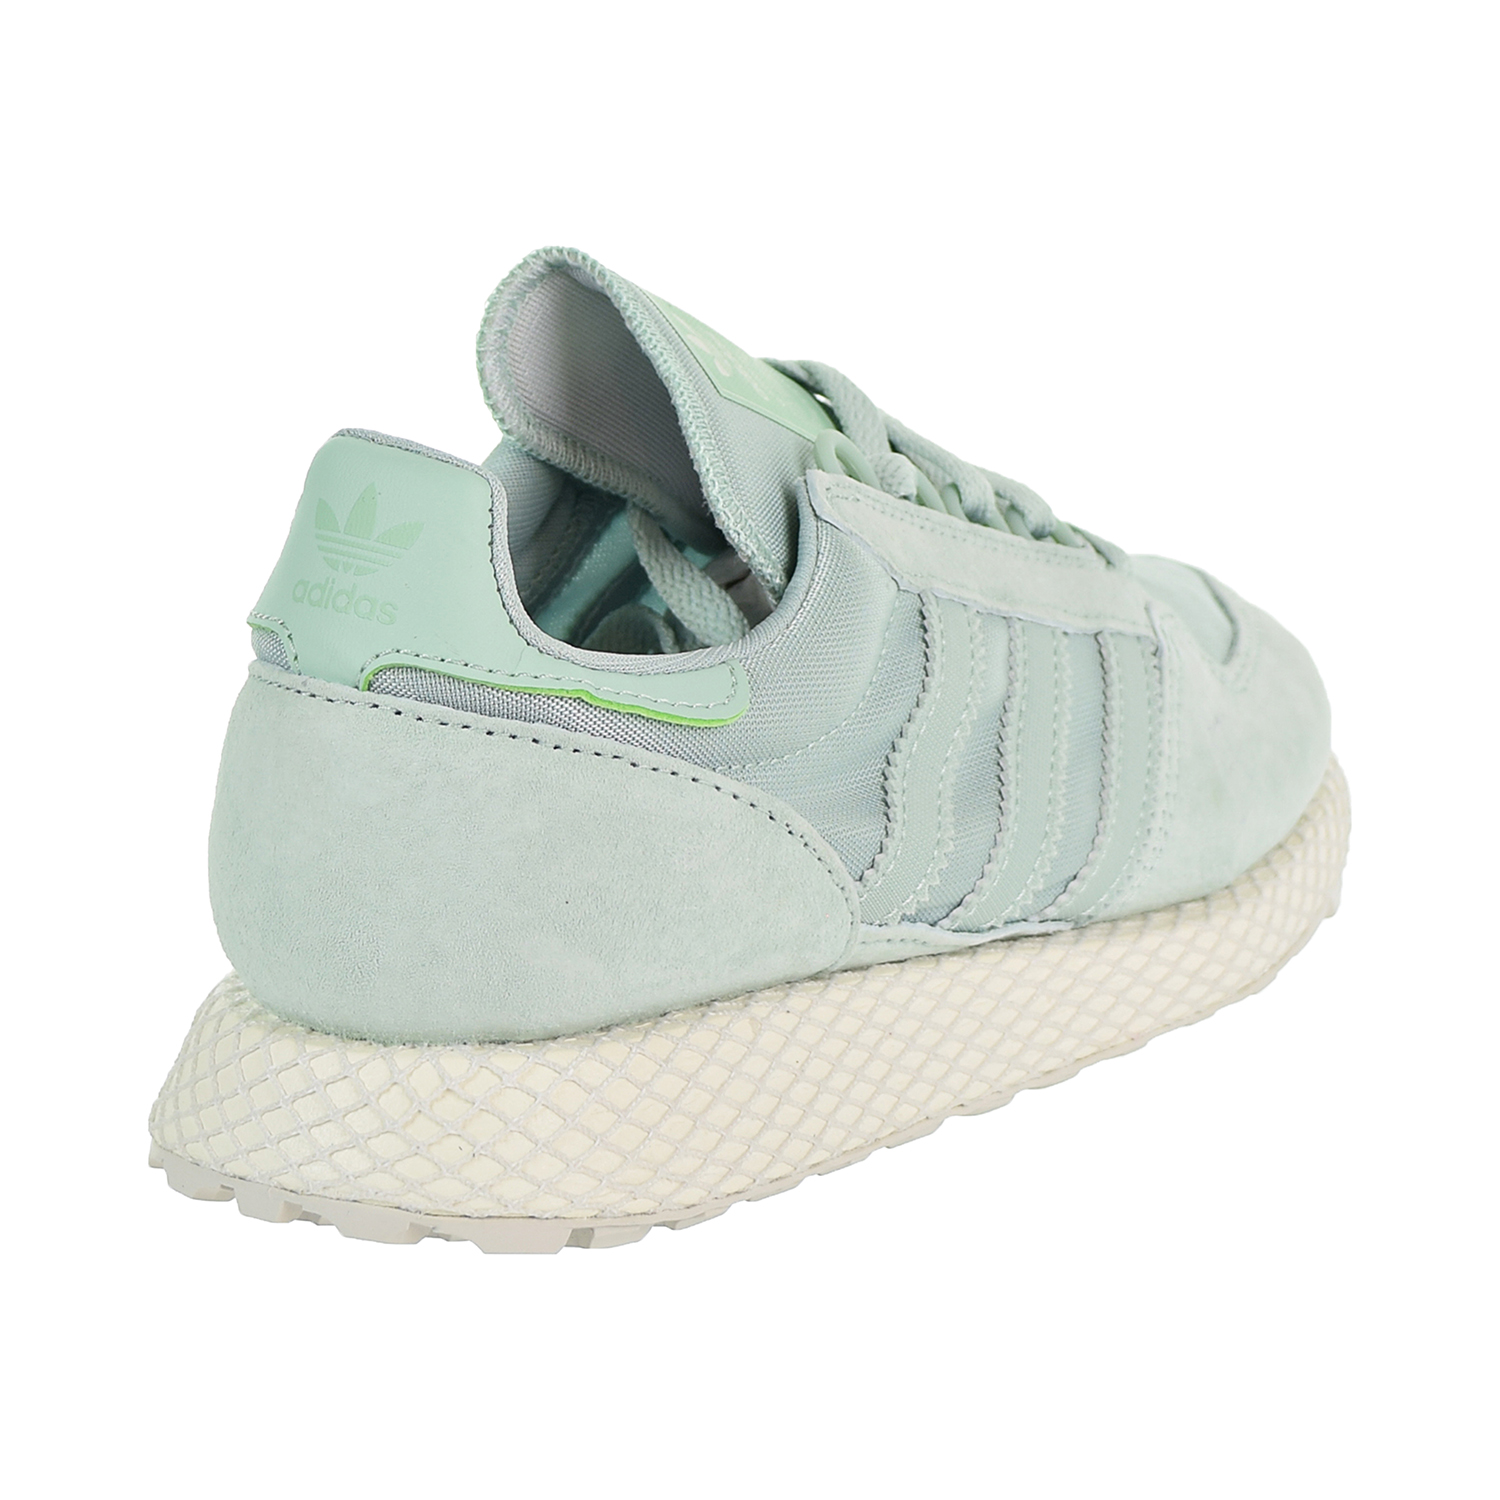 Adidas Forest Grove Women's Shoes Ash 